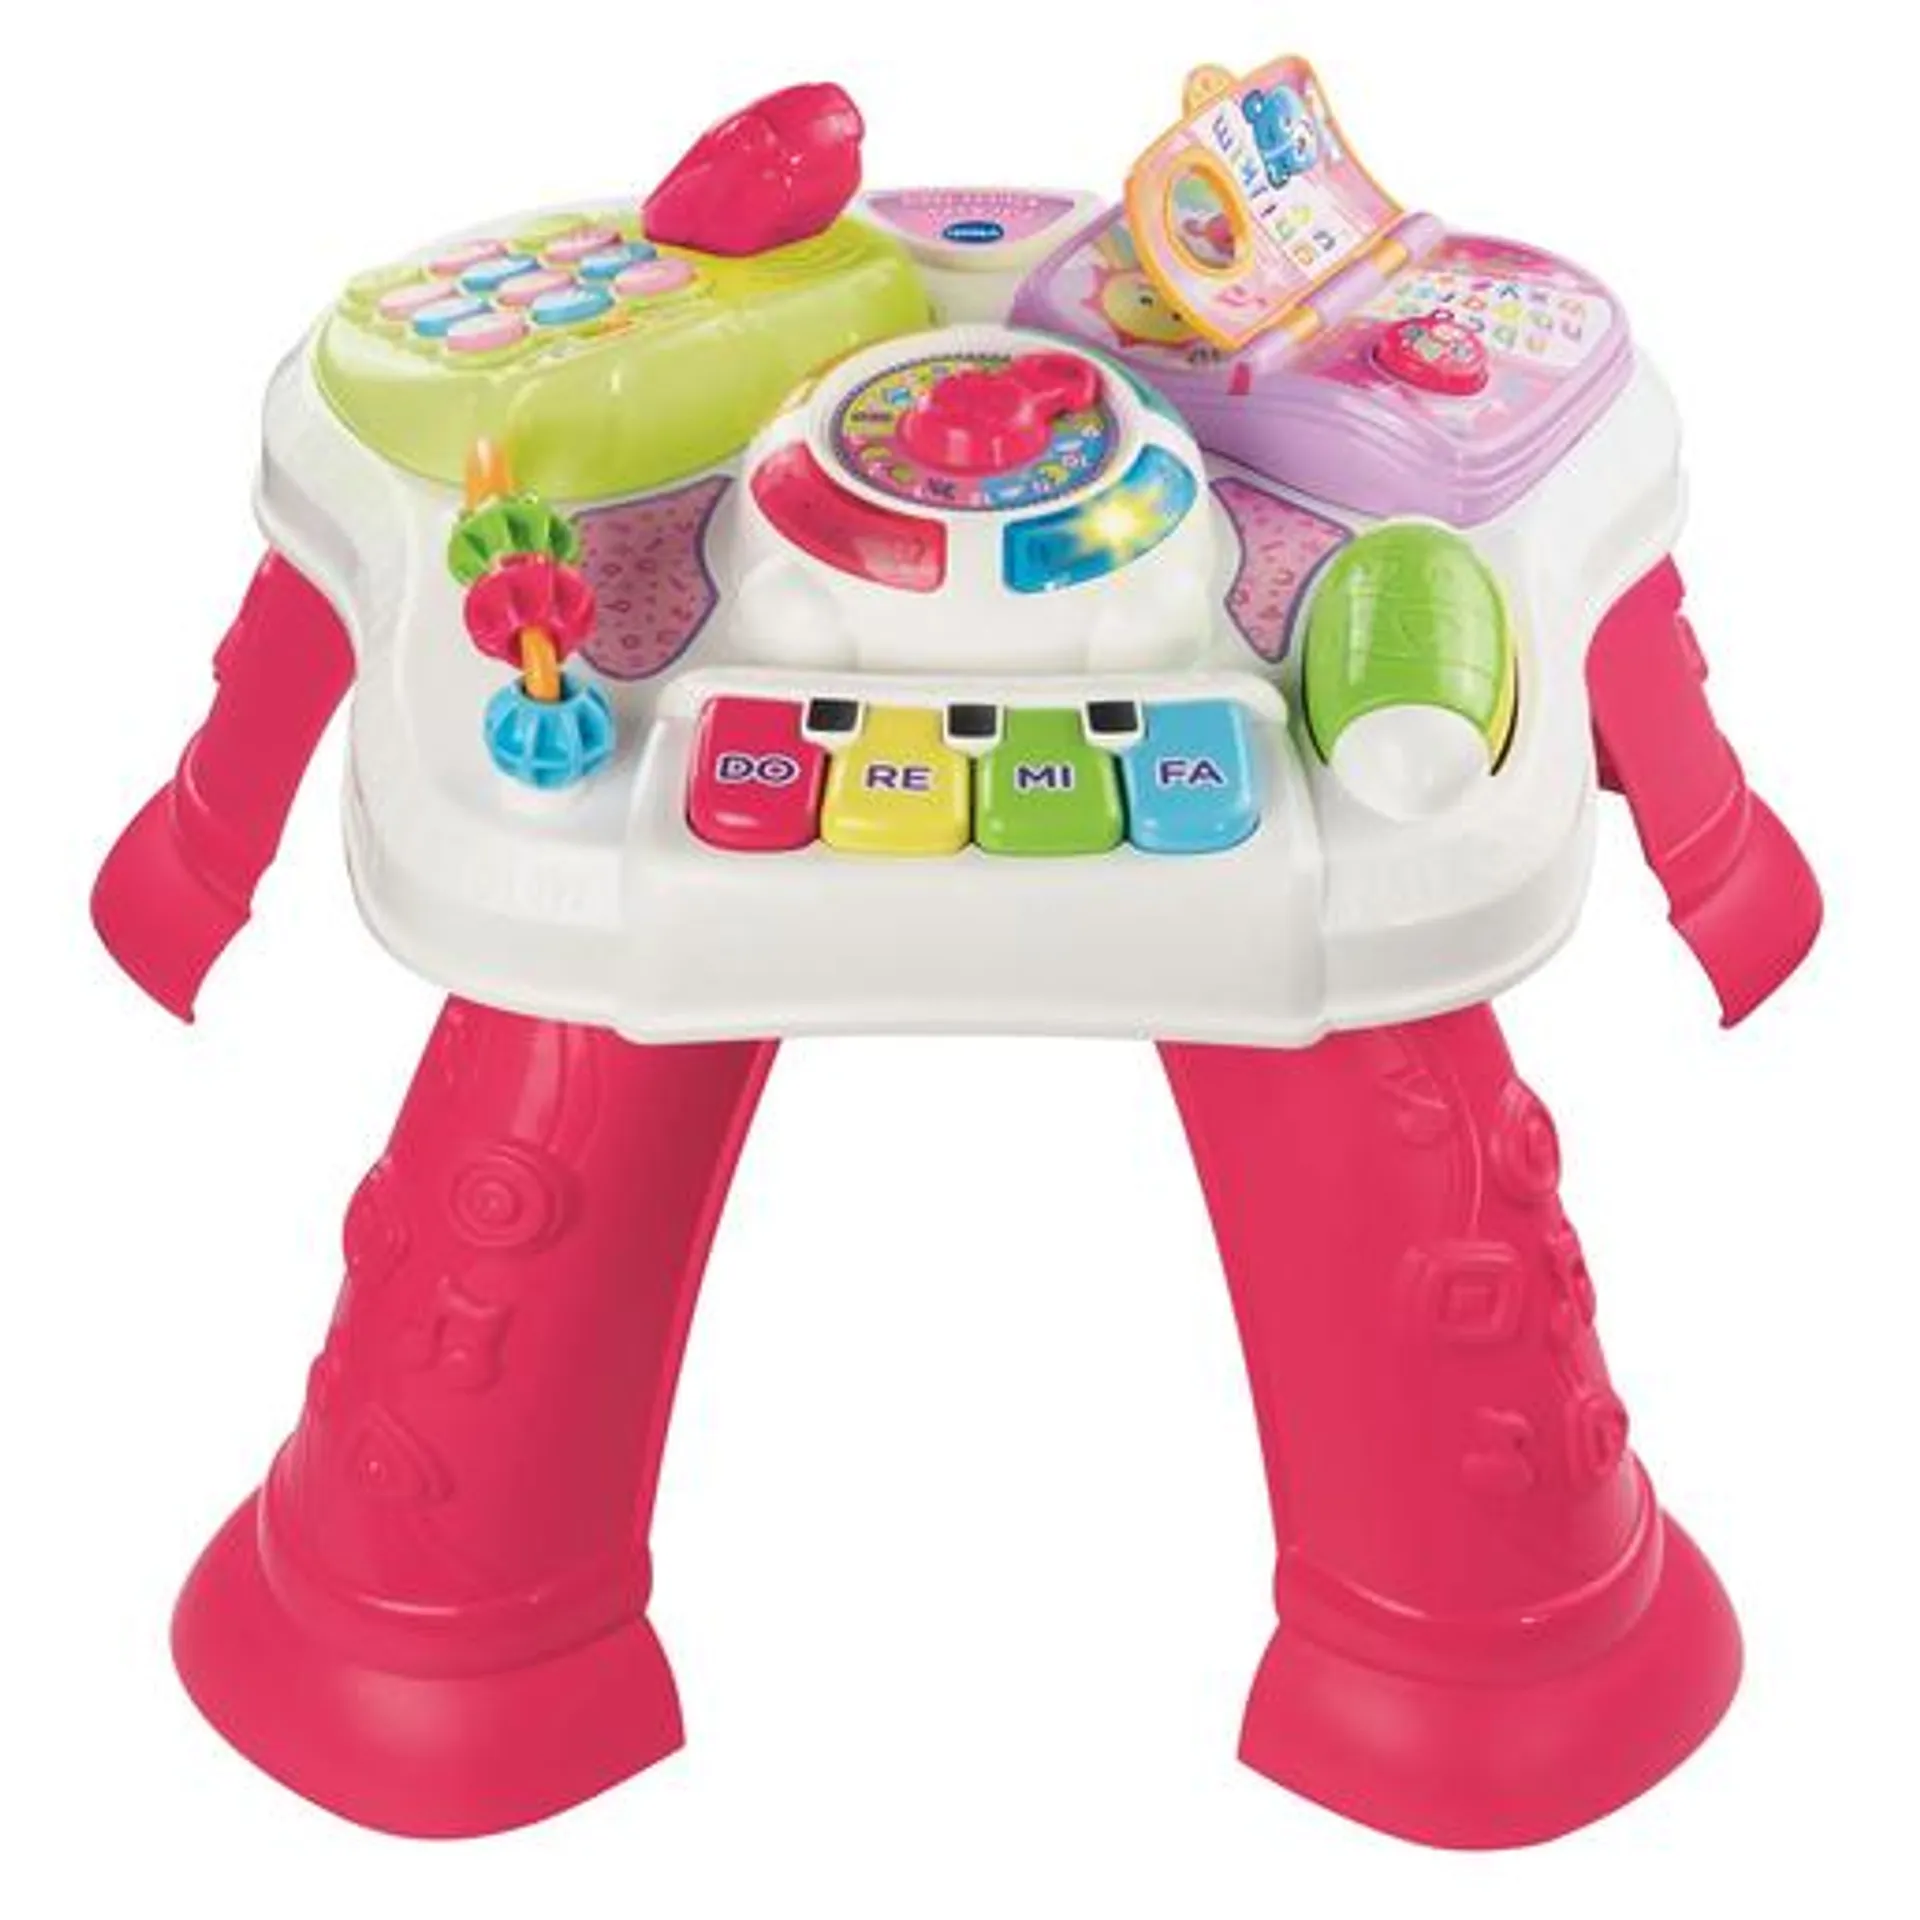 VTech Play & Learn Activity Table Pink